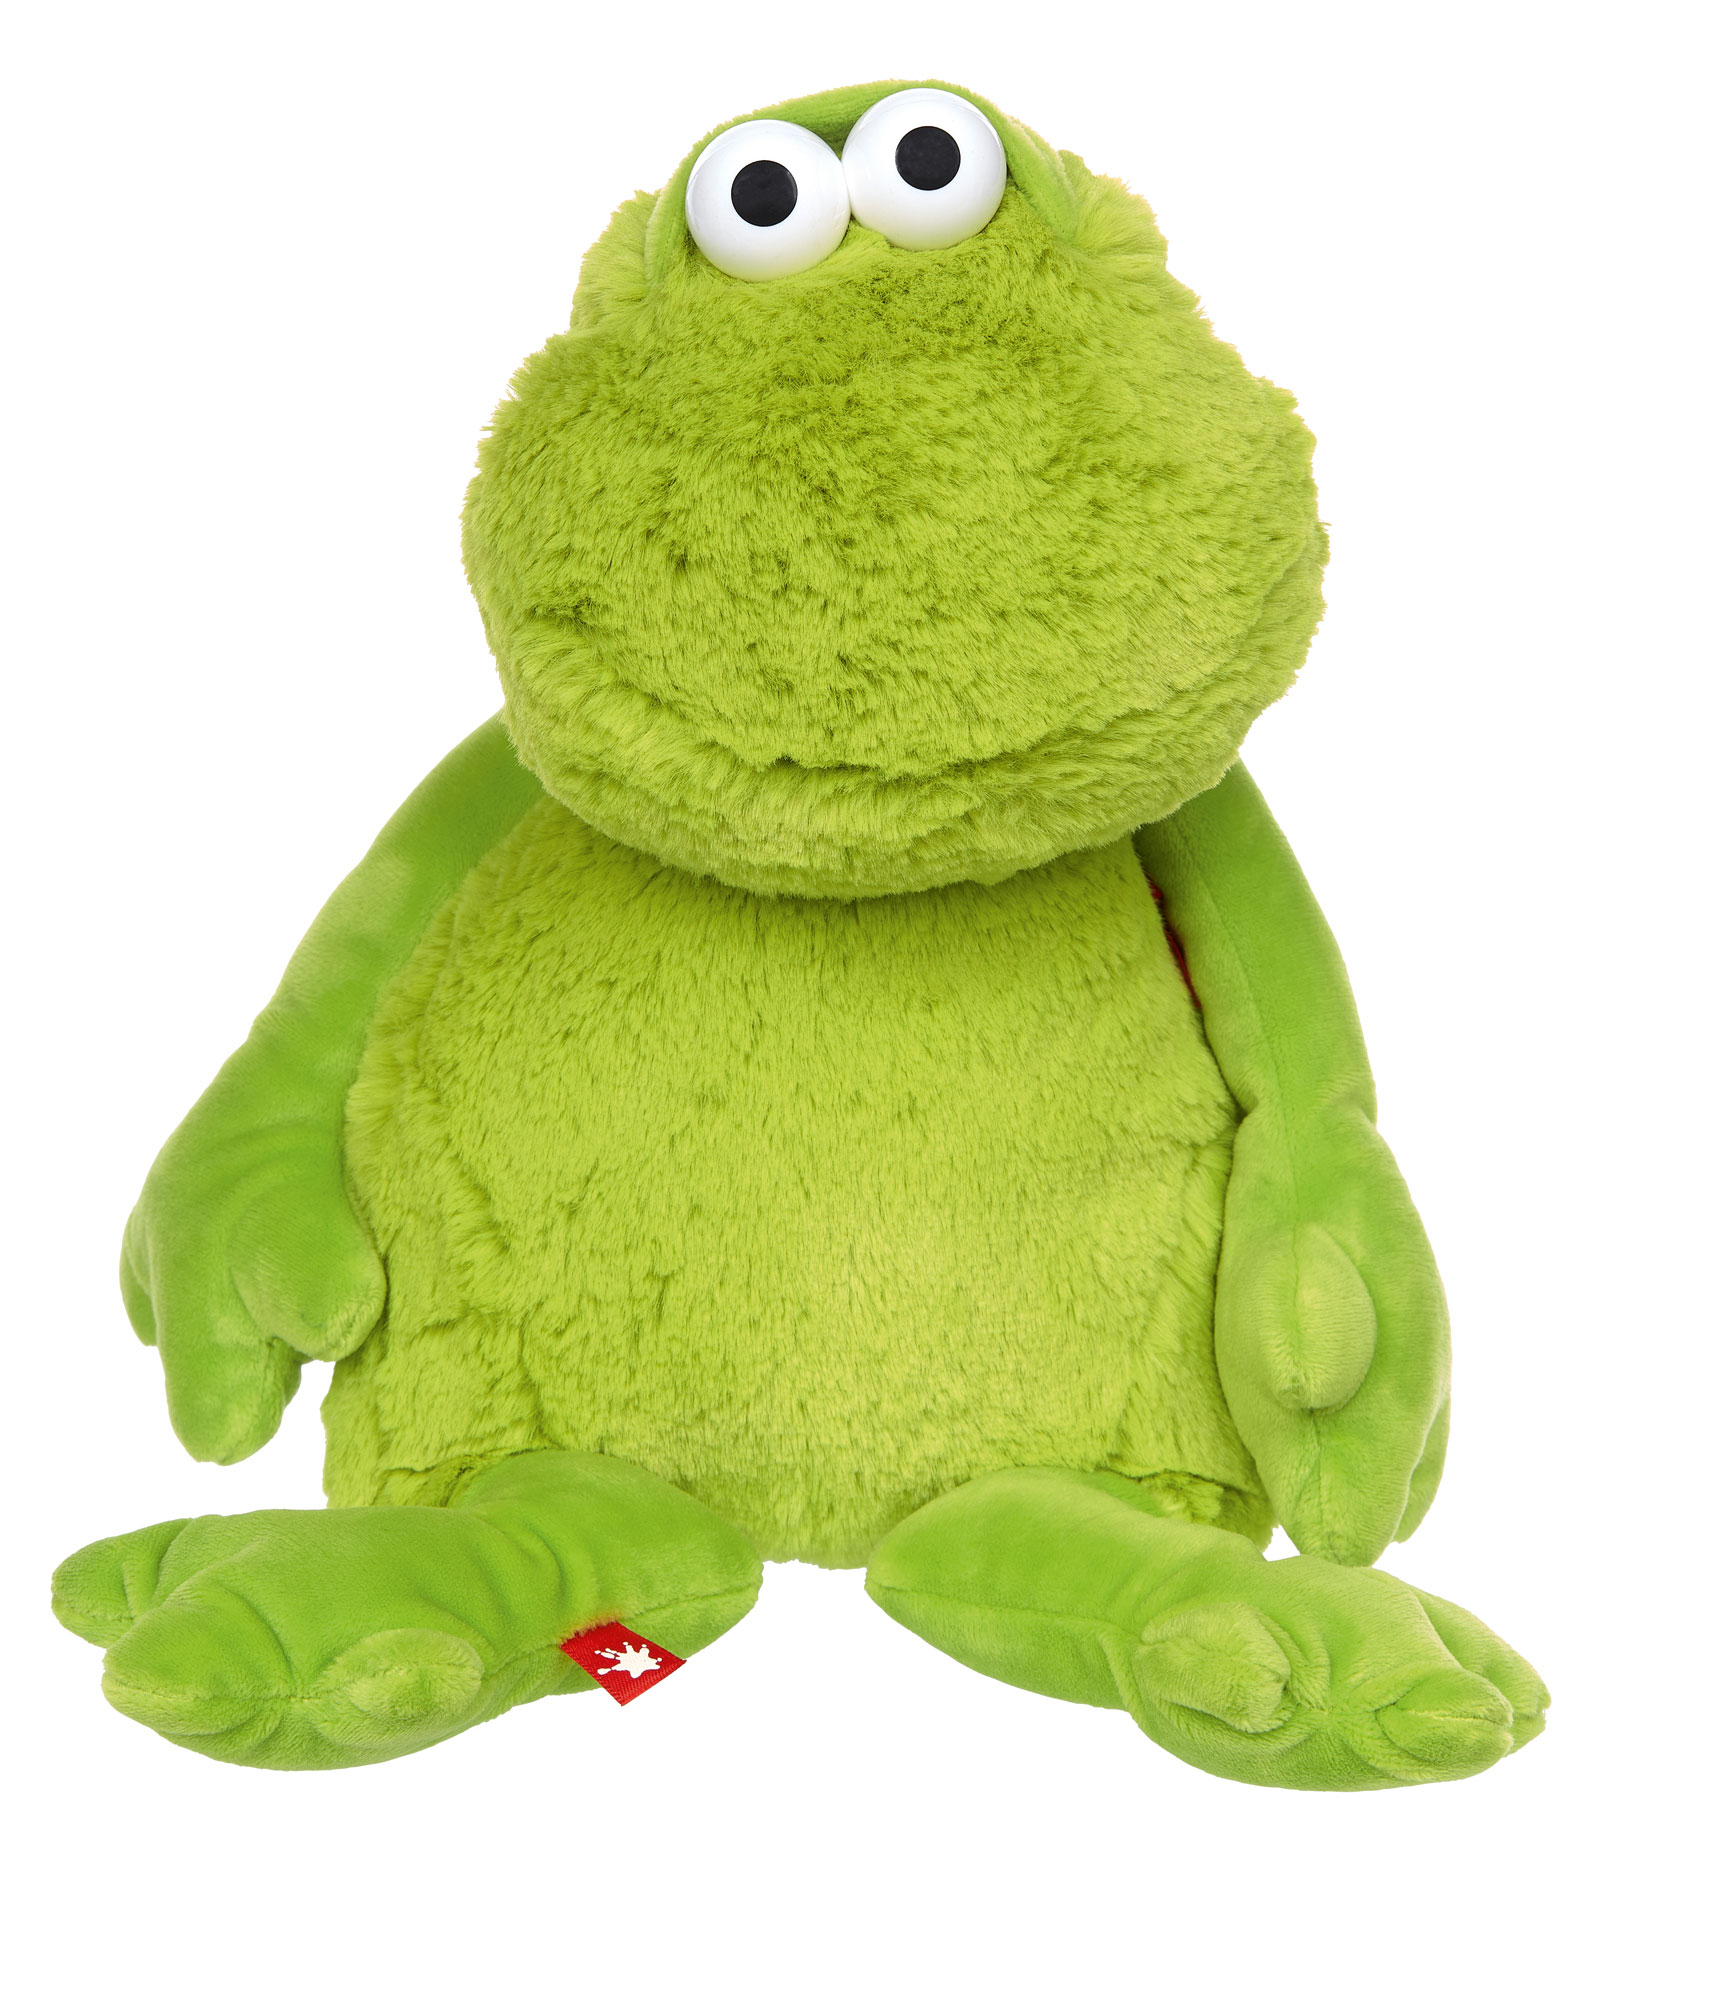 "Express your mood" plush frog